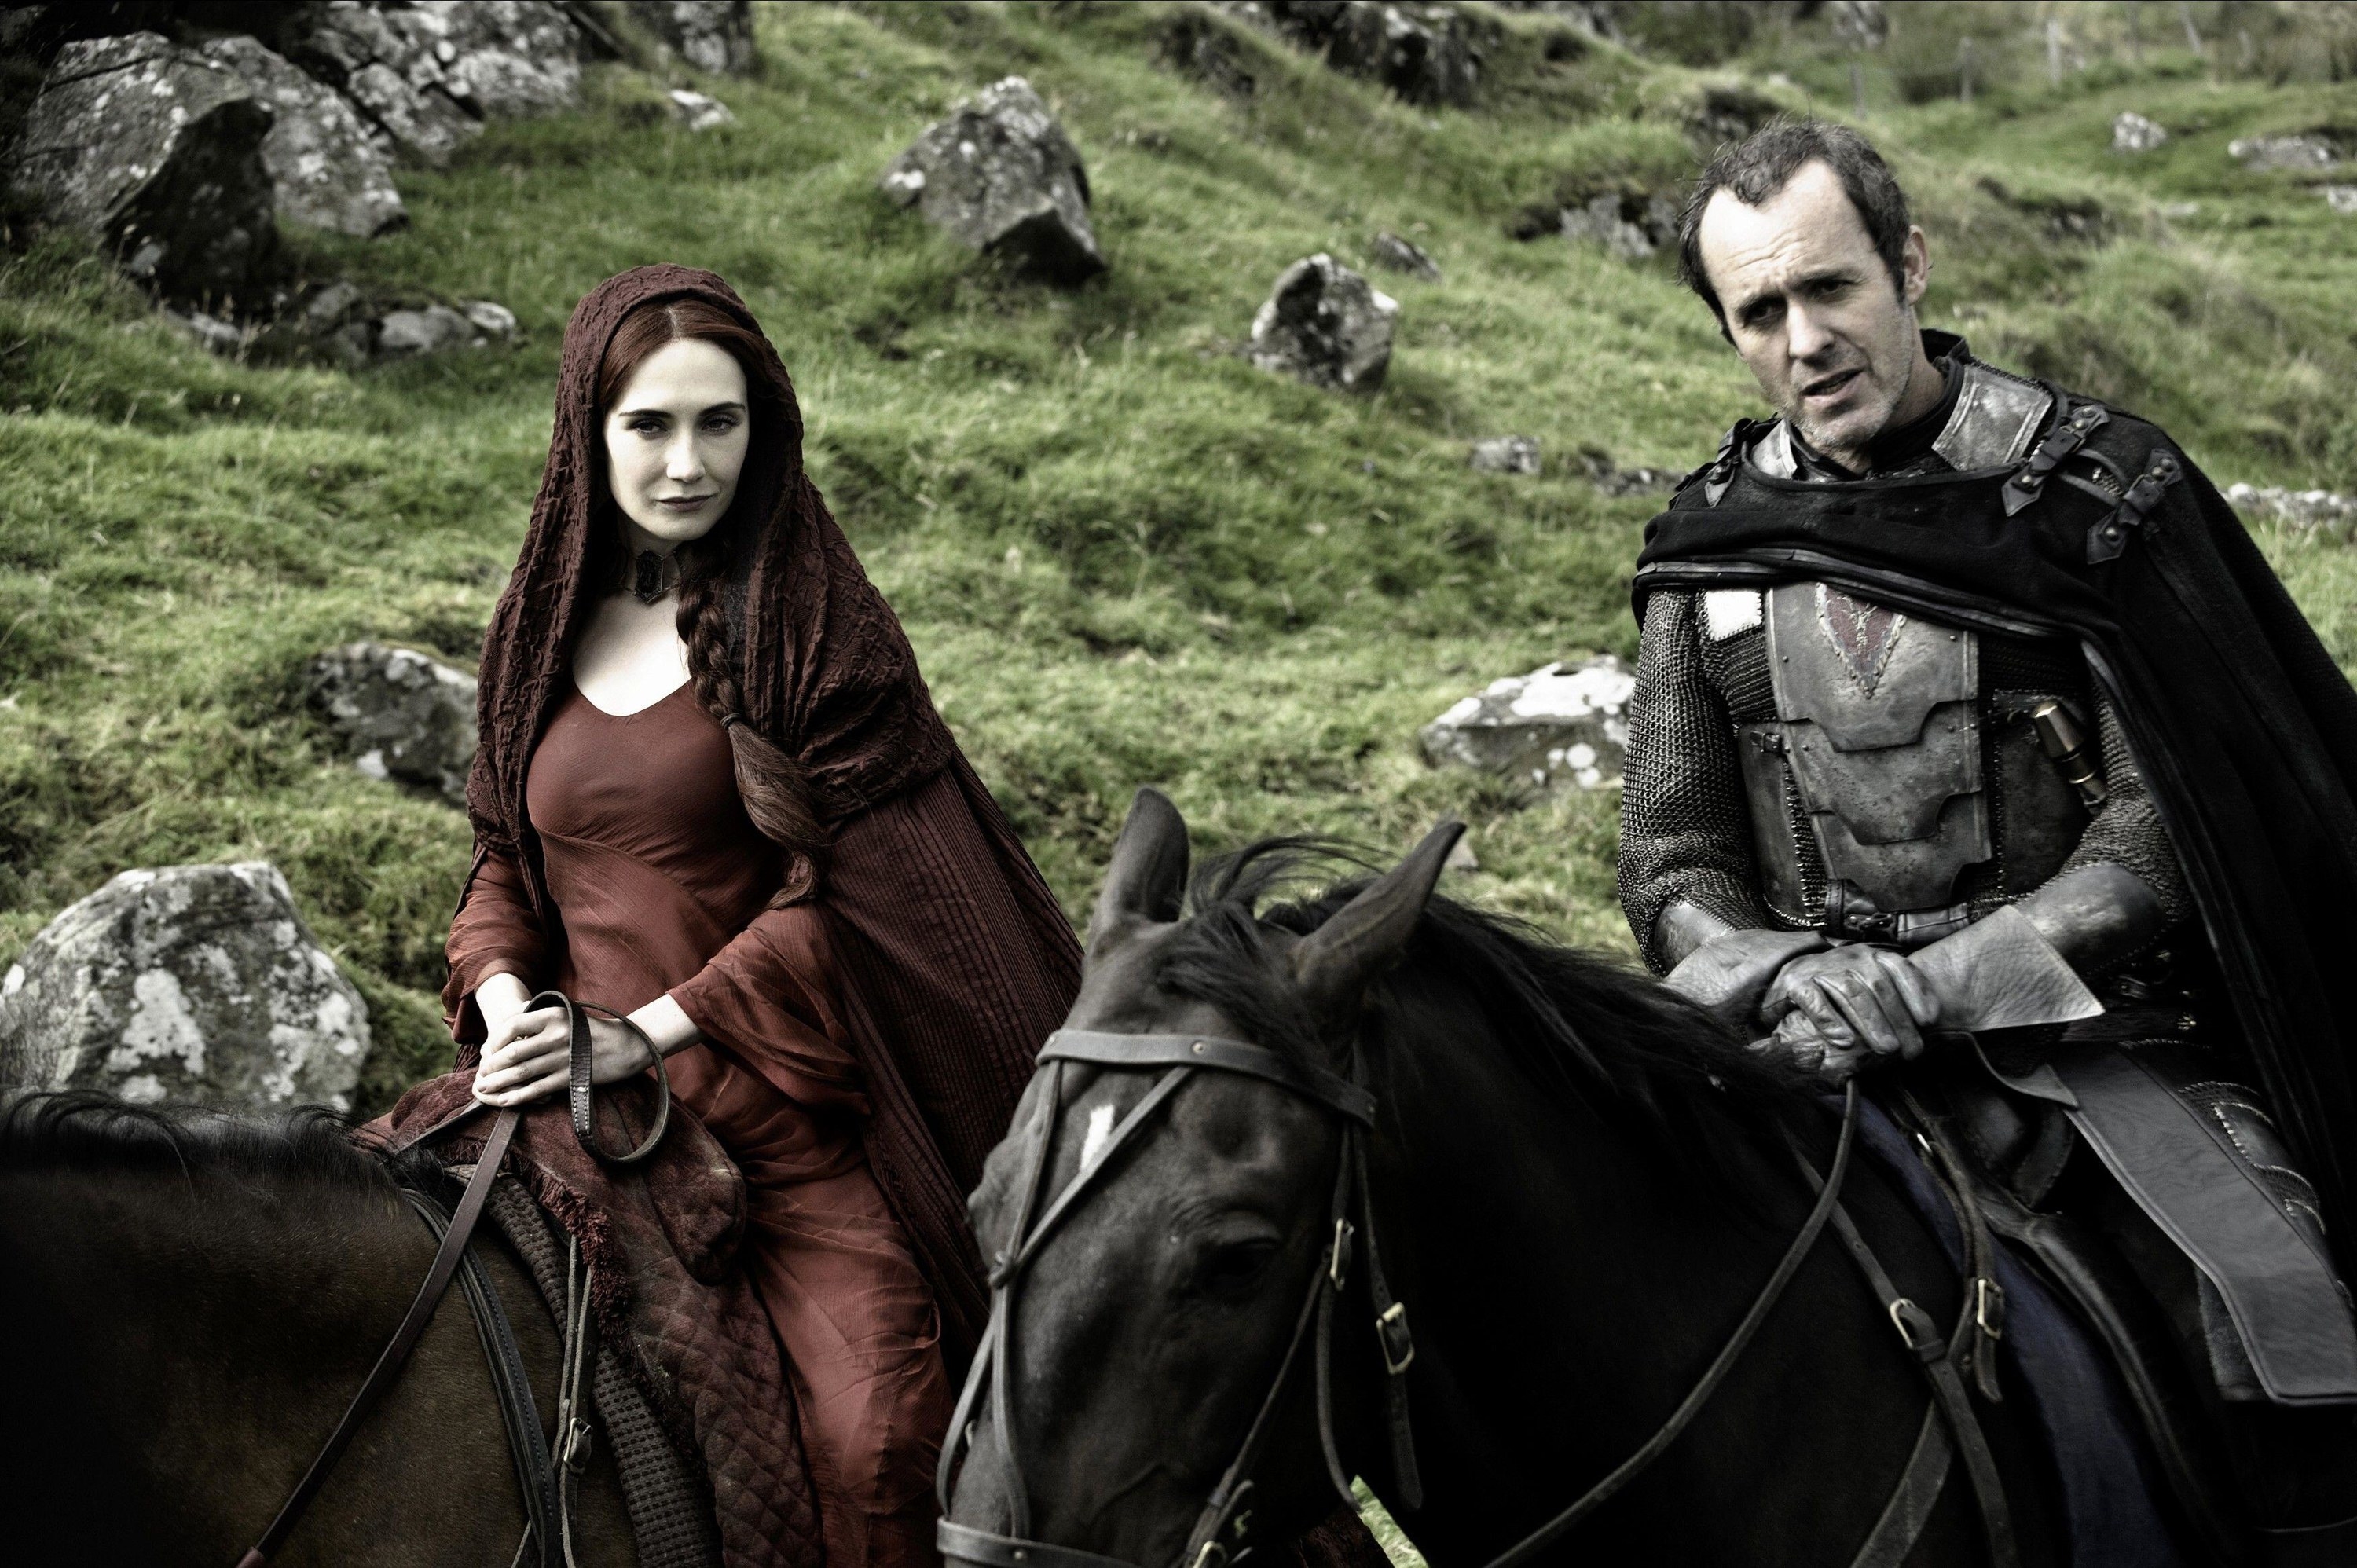 A woman in a red dress and cloak rides her horse alongside a man in all-black leathers and a cape.